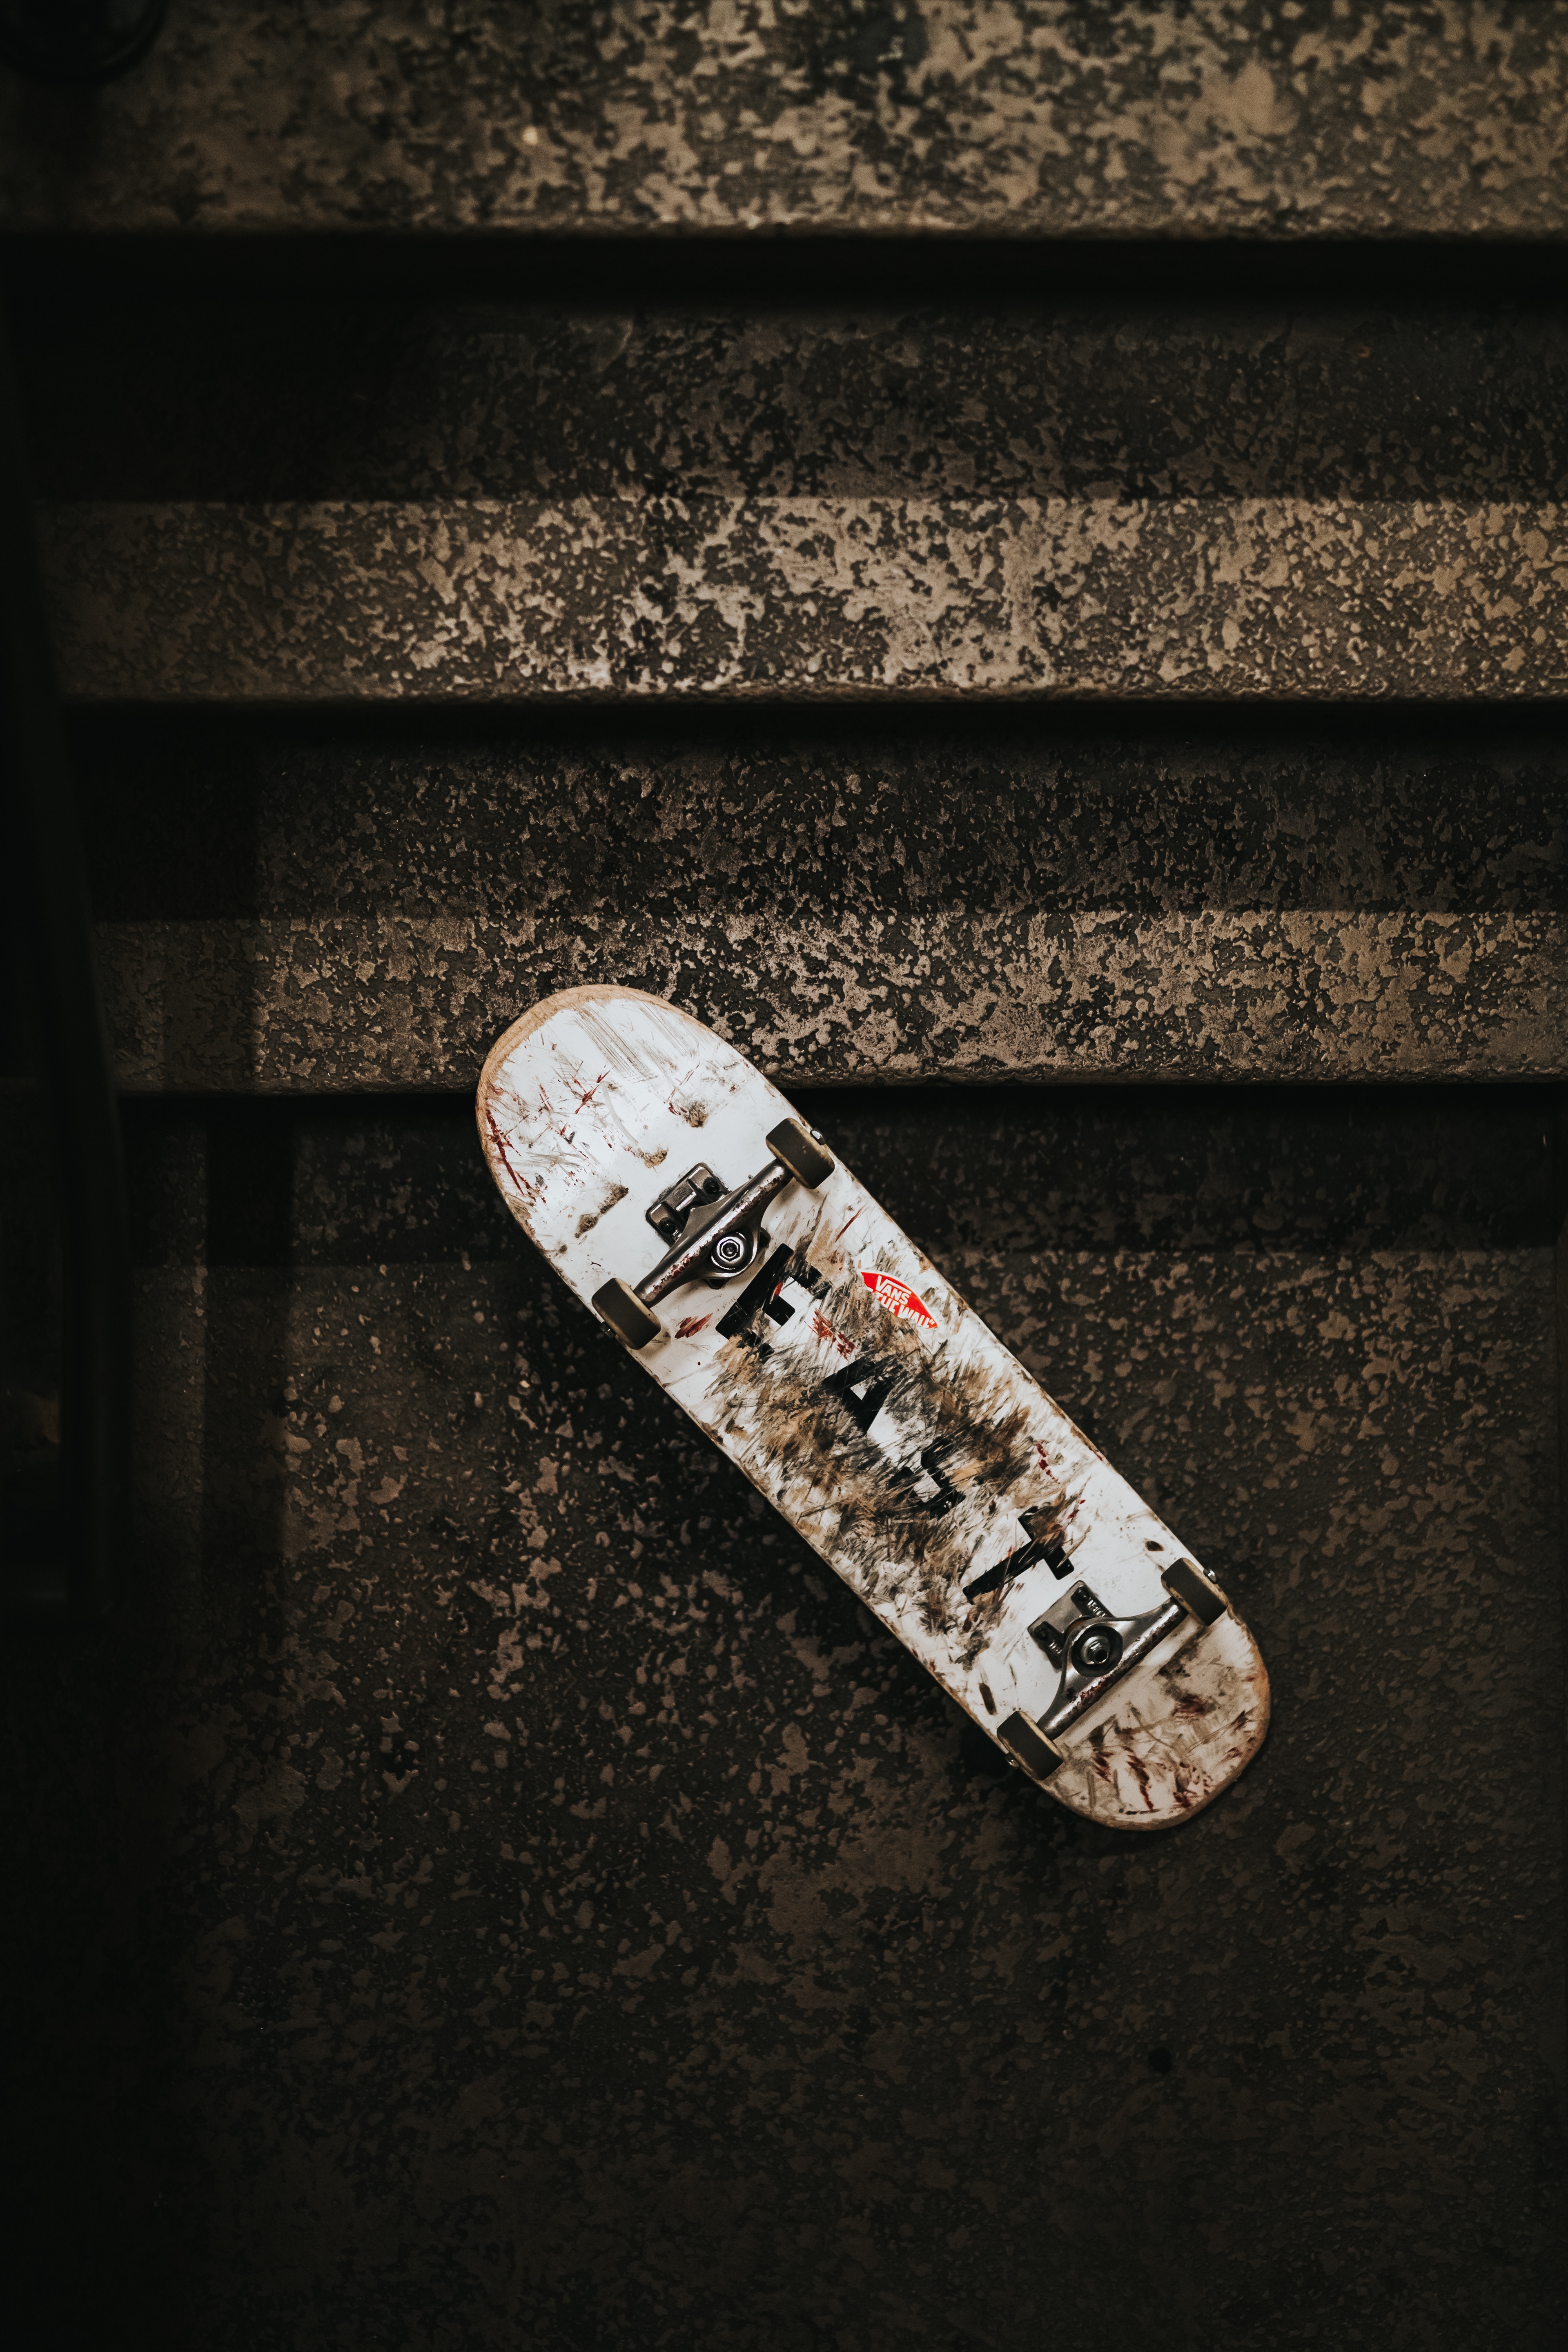 sports, lost, stairs, ladder, shabby, skateboard, wheels, dirty wallpapers for tablet